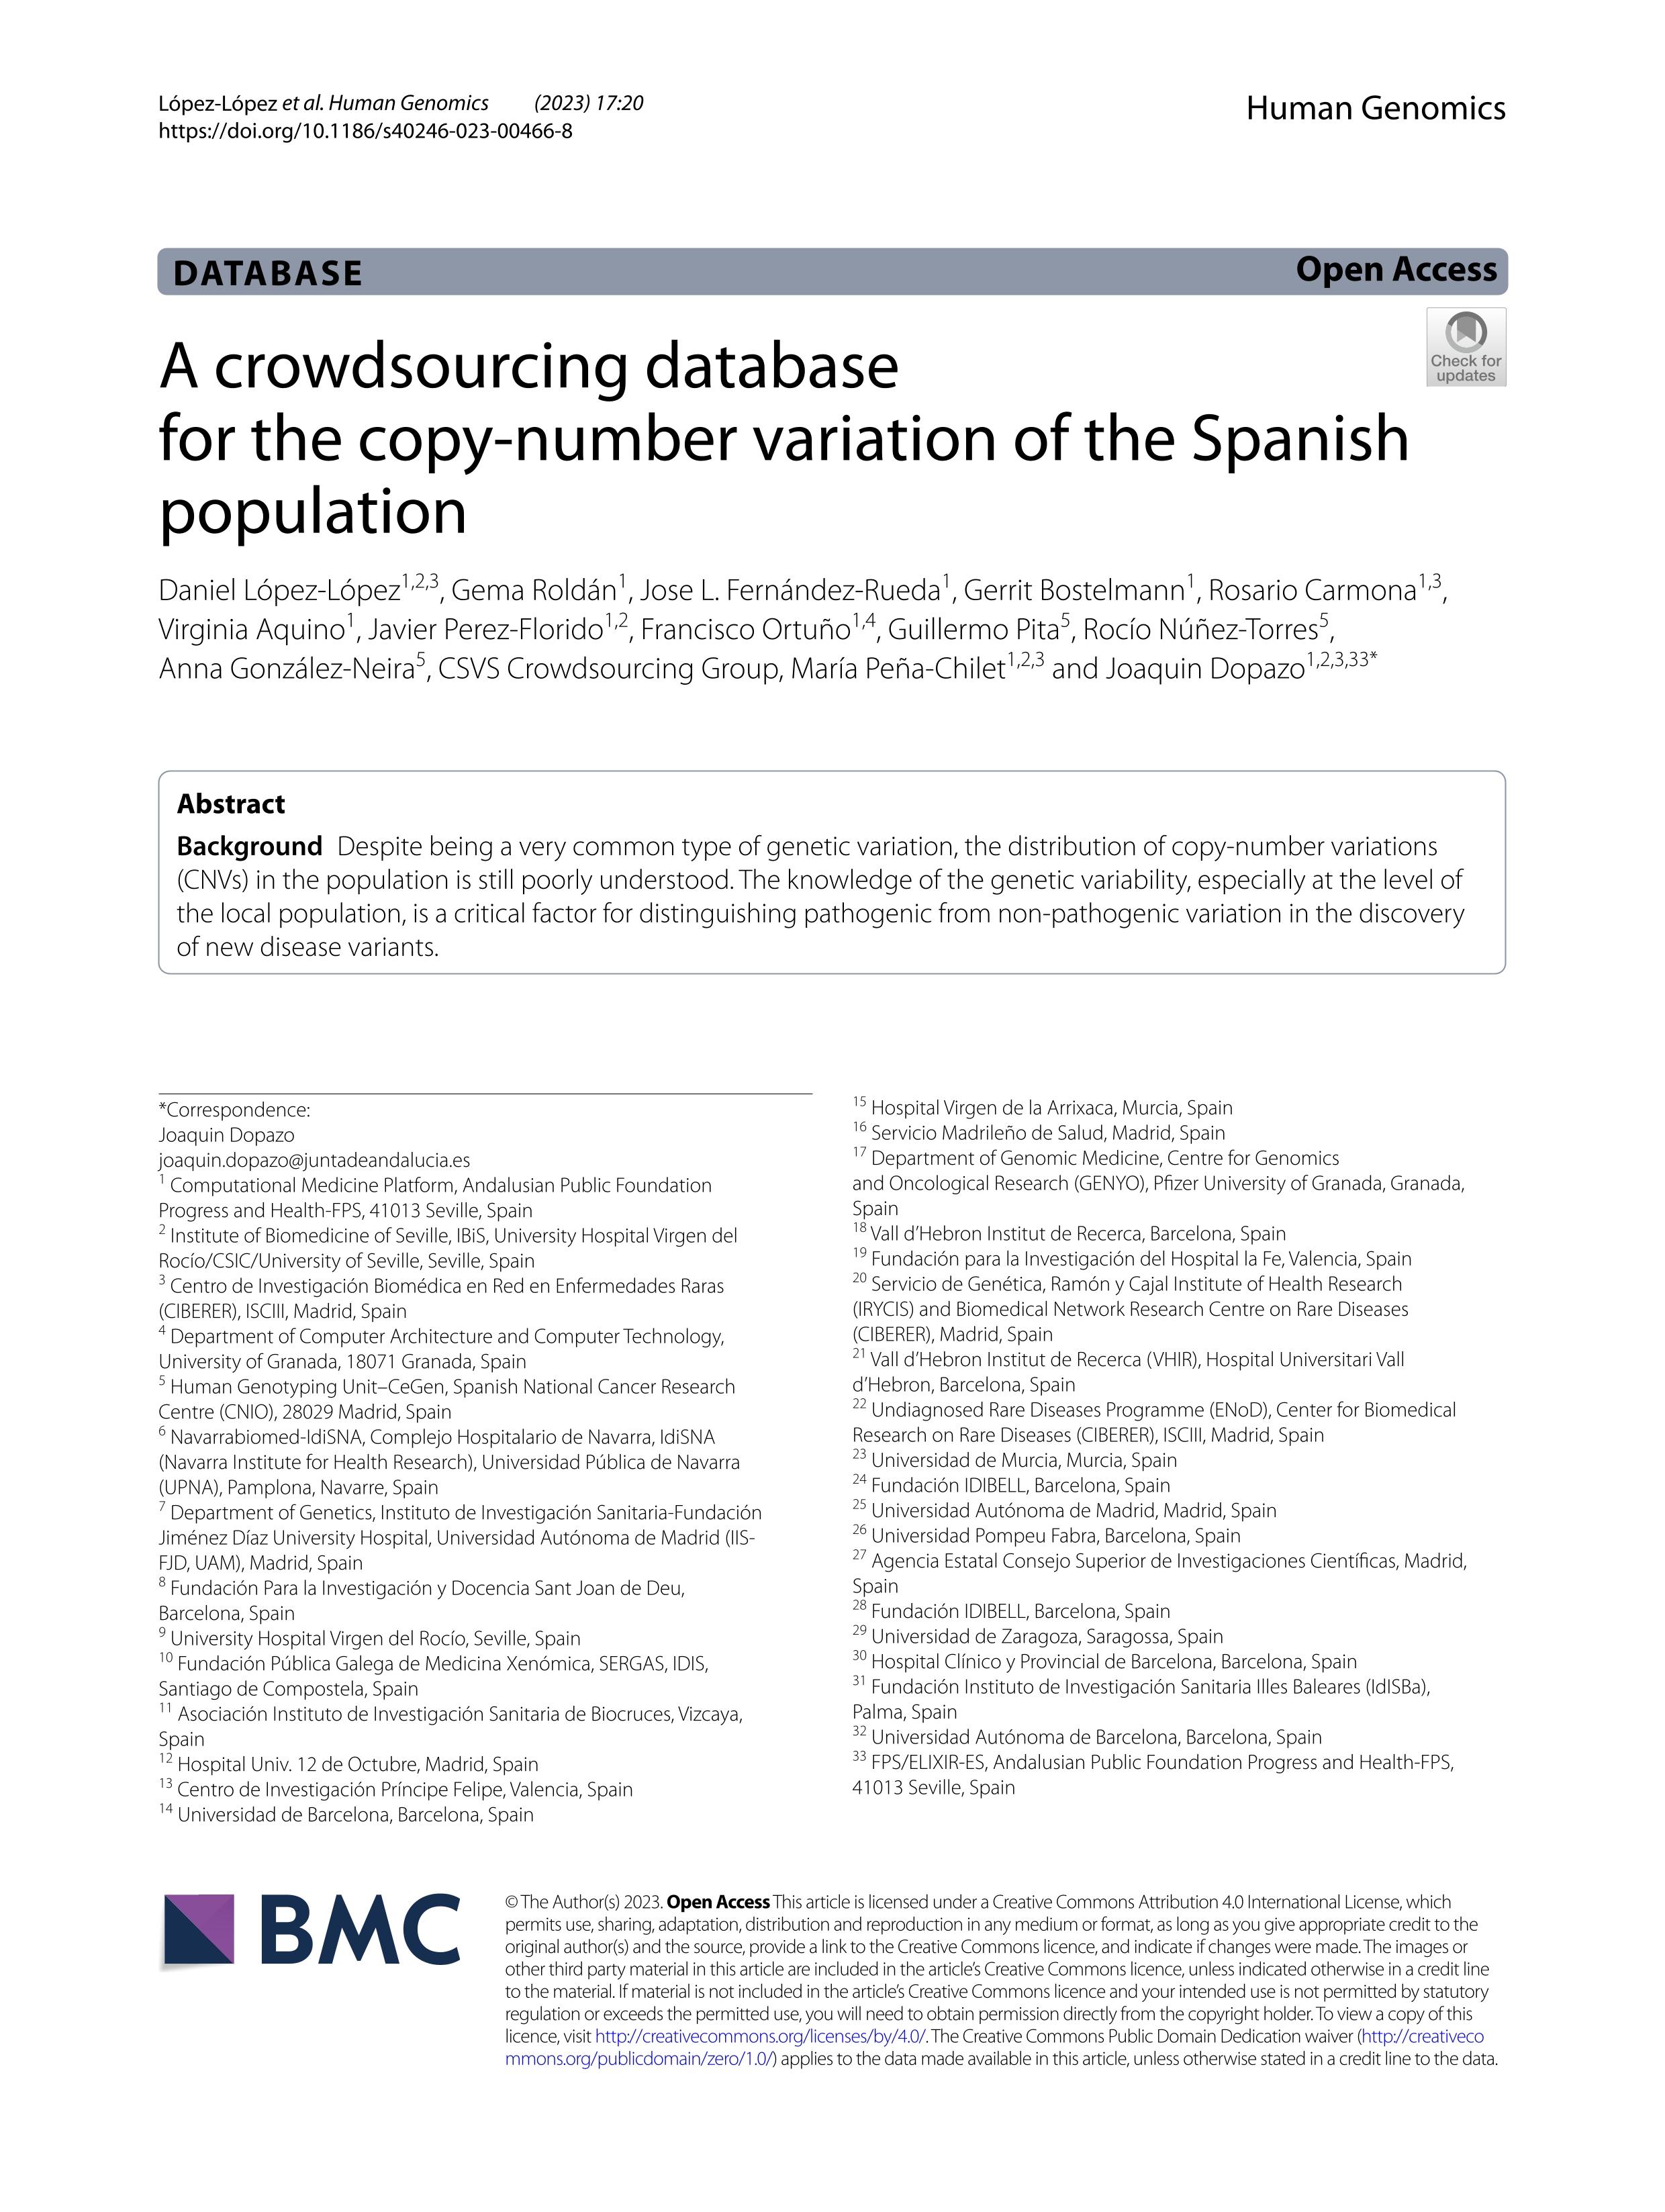 A crowdsourcing database for the copy-number variation of the Spanish population